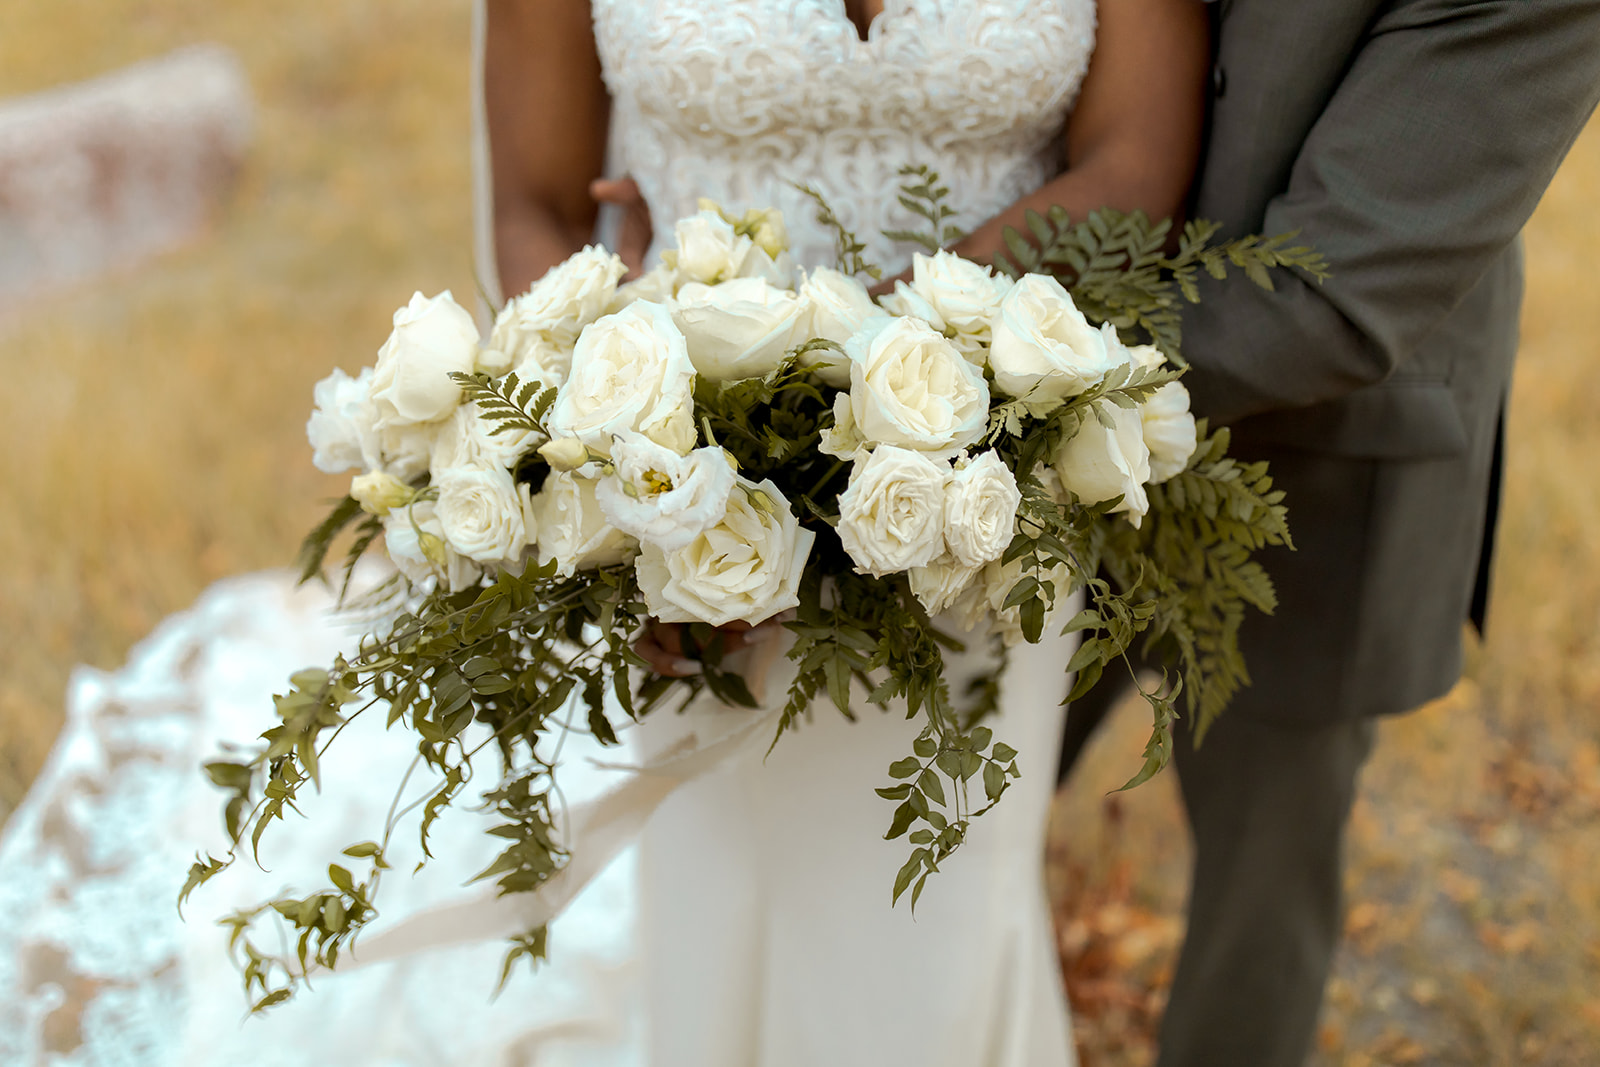 White Rose and Greenery bouquet for white, sage, gold, and greenery fall theme for fall wedding